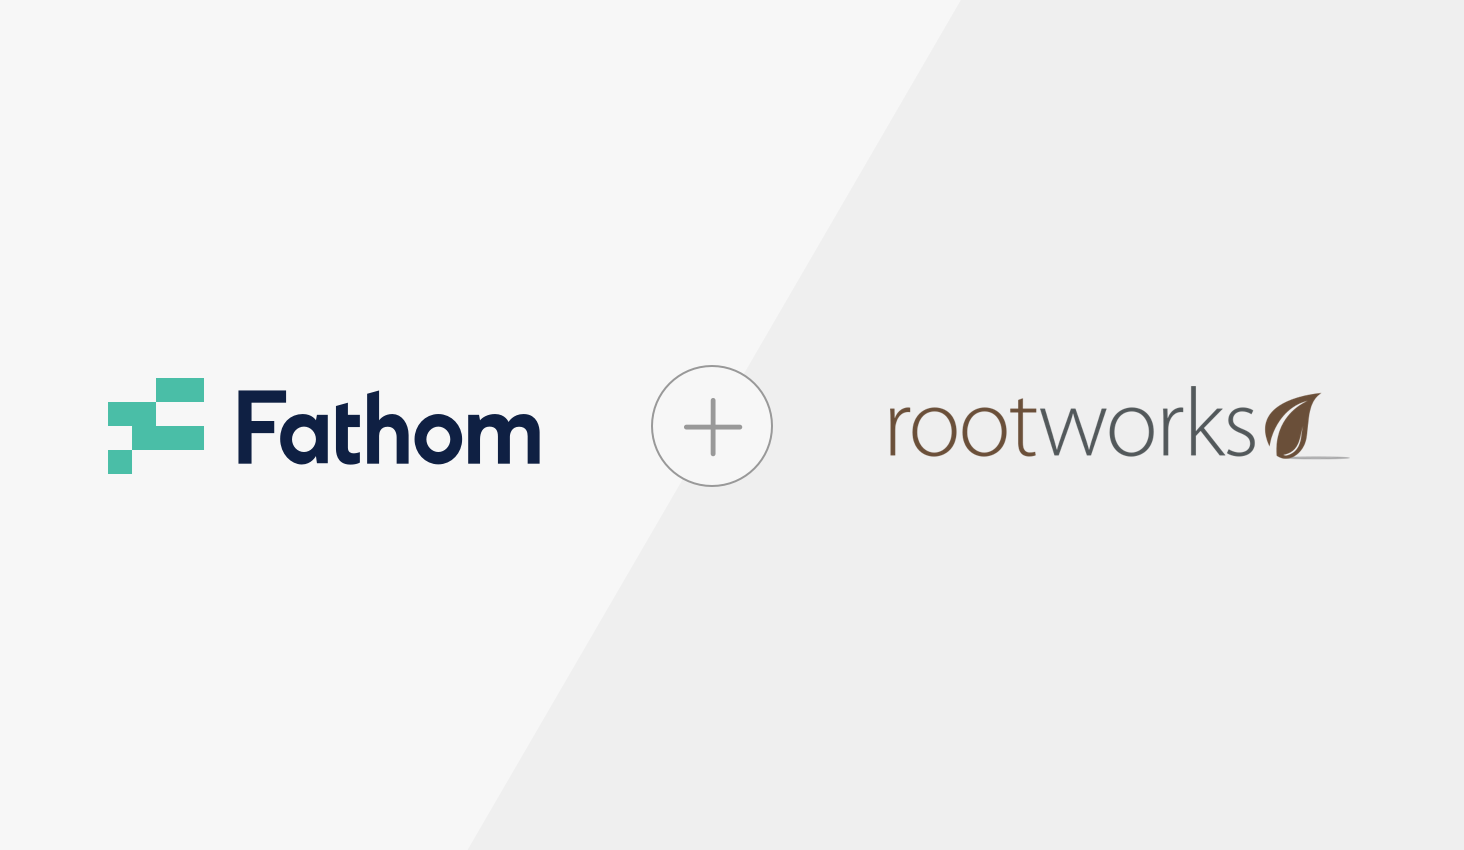 Fathom announces partnership with Rootworks@2x